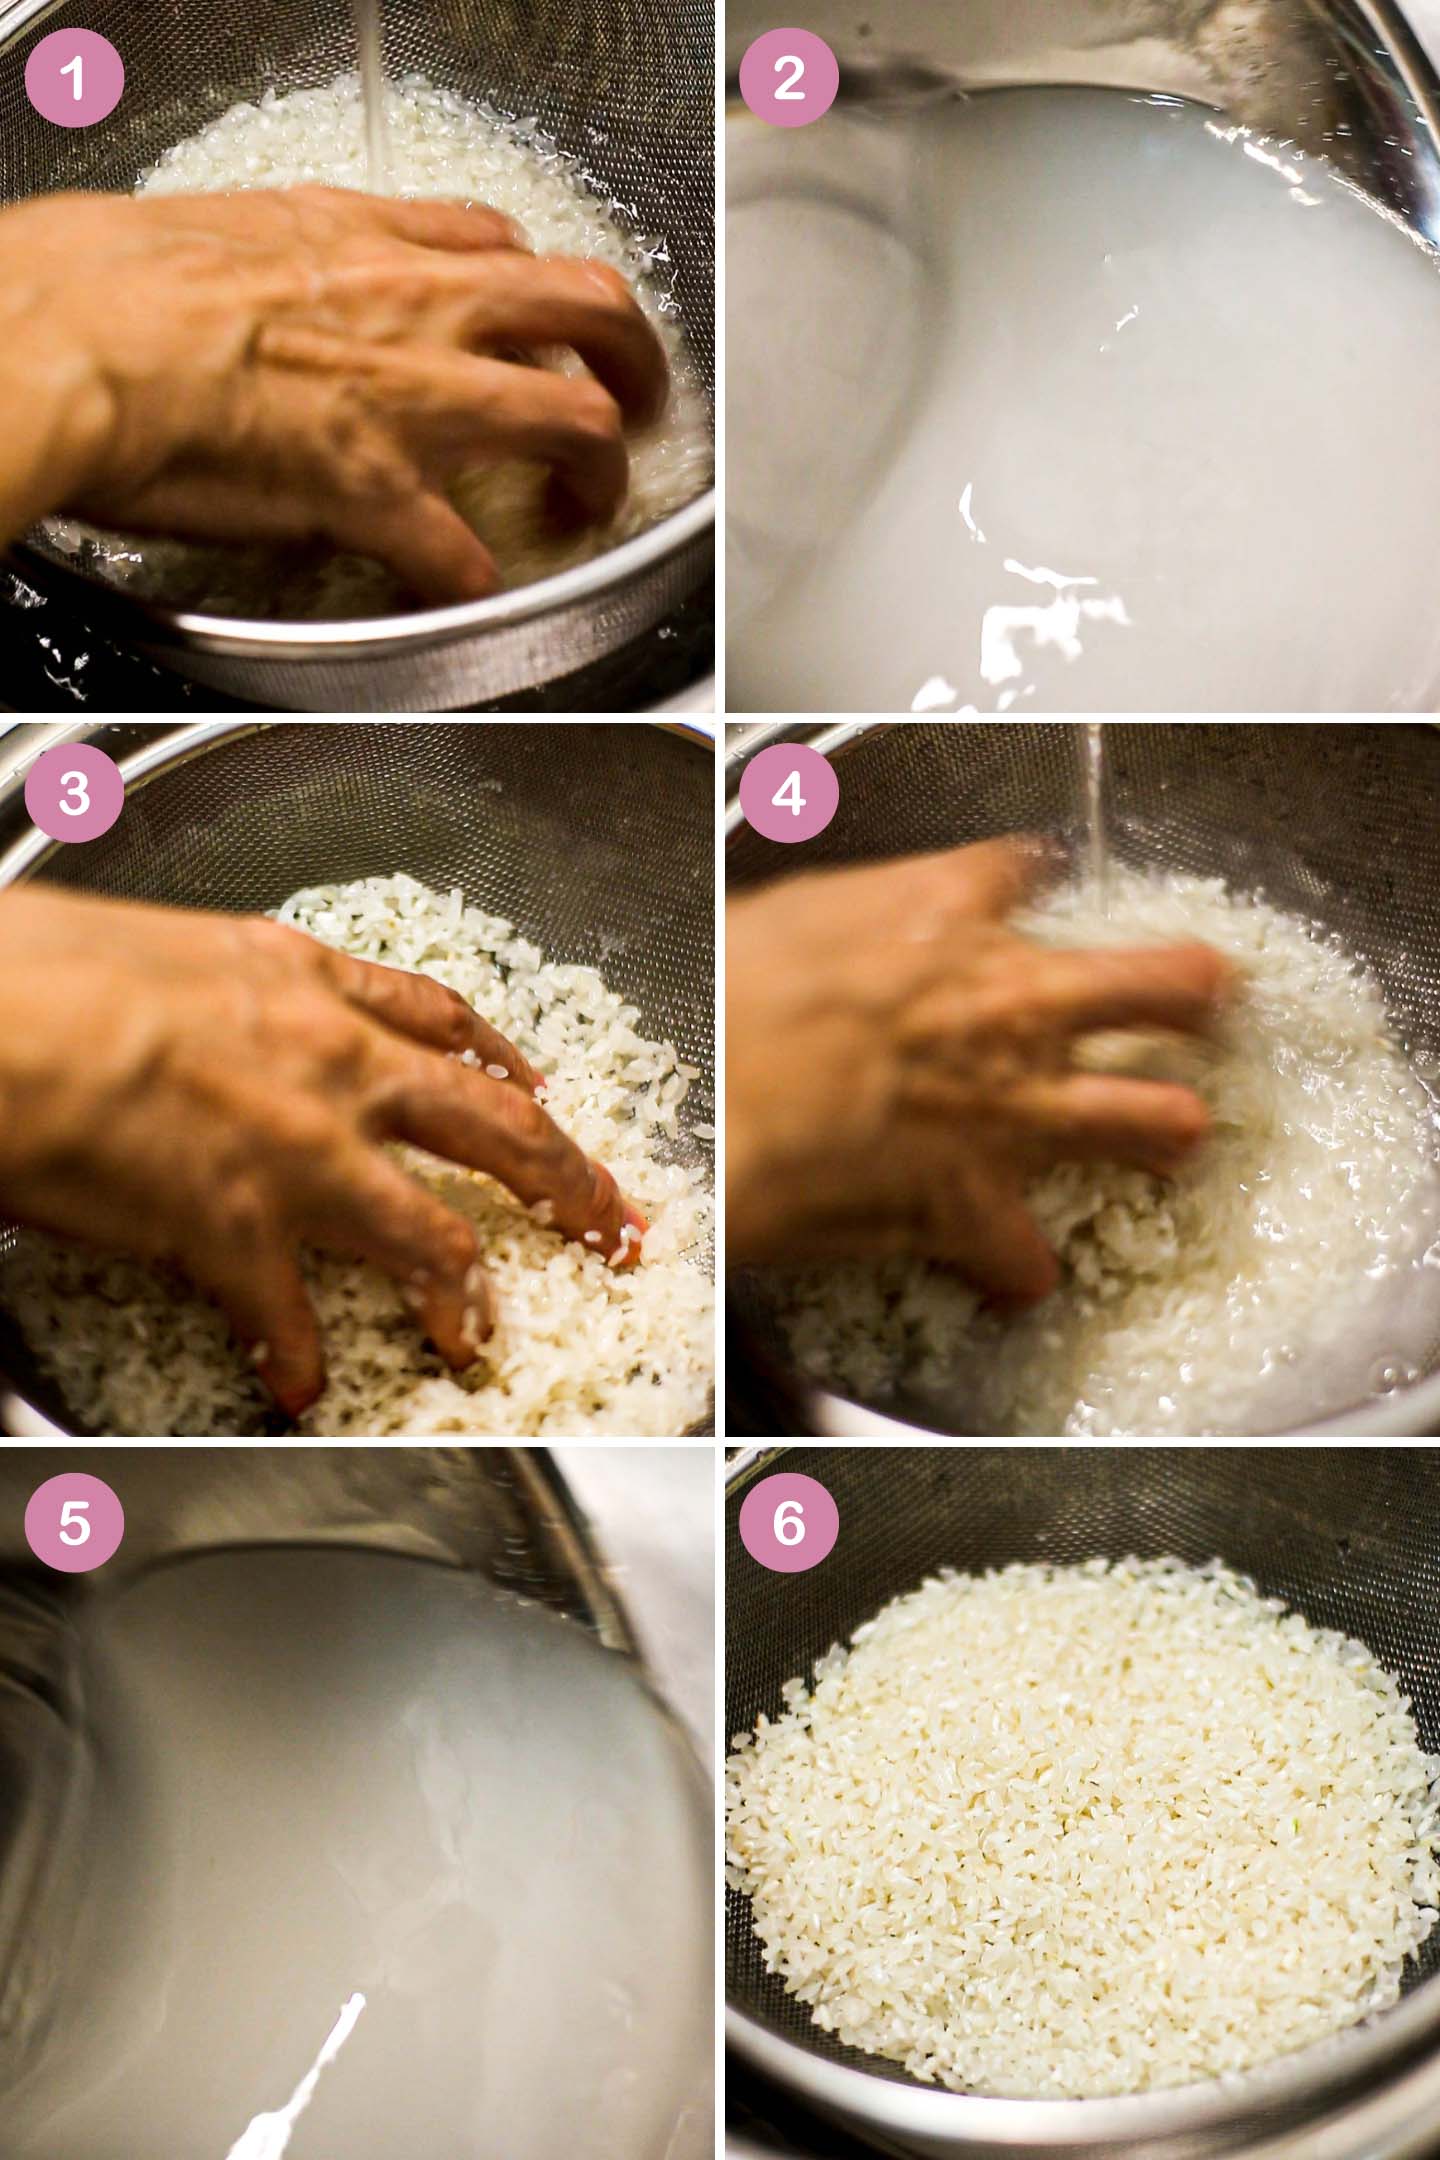 How To Make White Rice In Instant Pot STEP 1 how to rinse rice properly